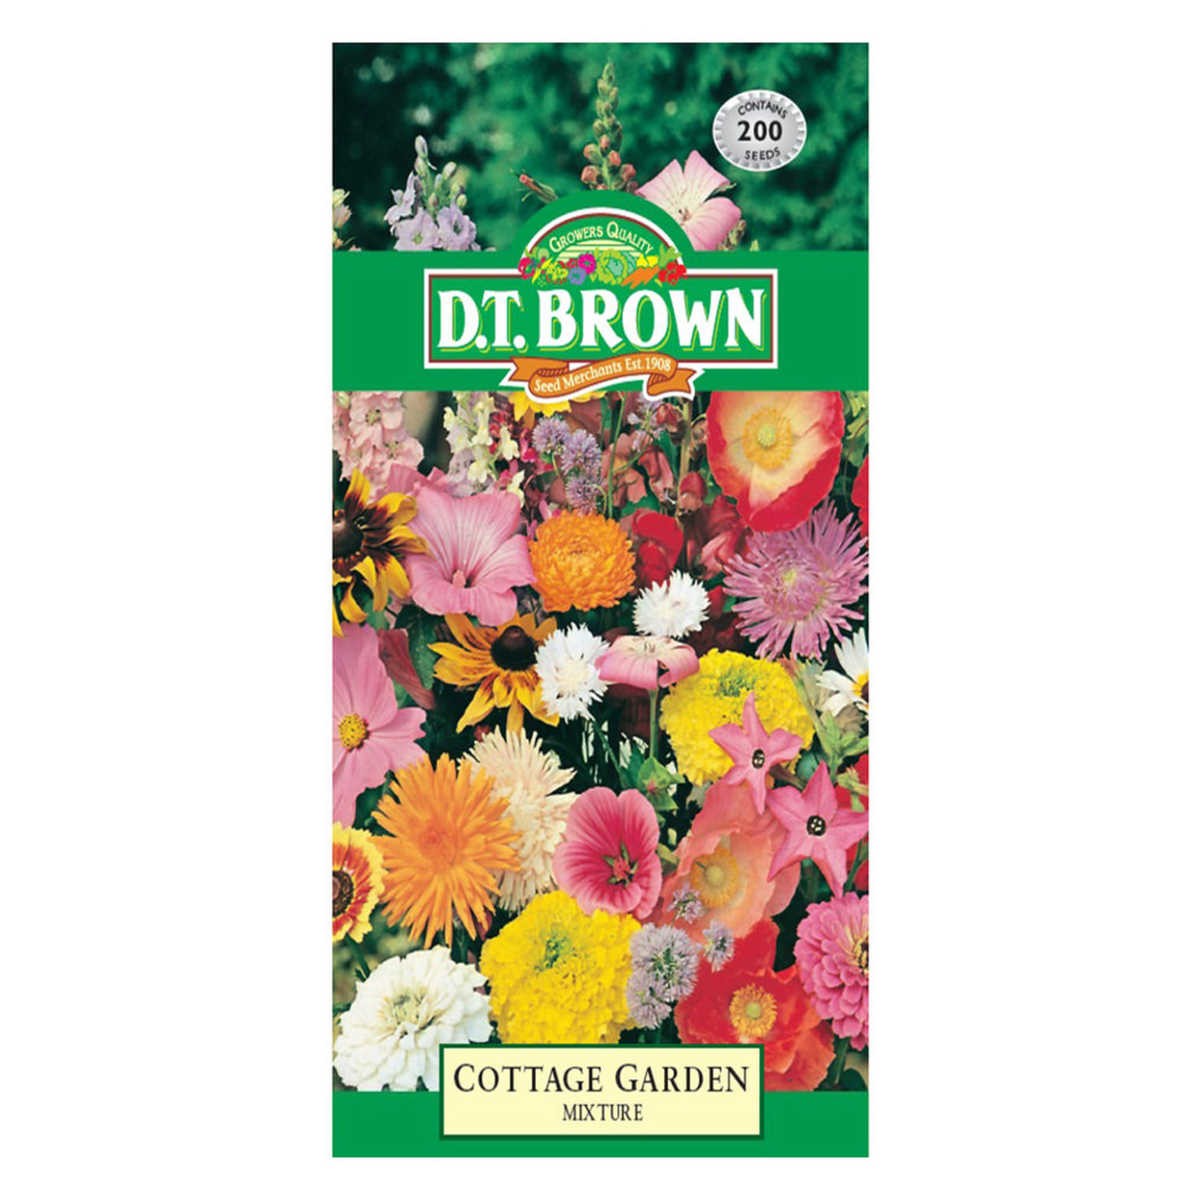 Buy DT Brown Cottage Garden Mixed Seeds | Dollars and Sense